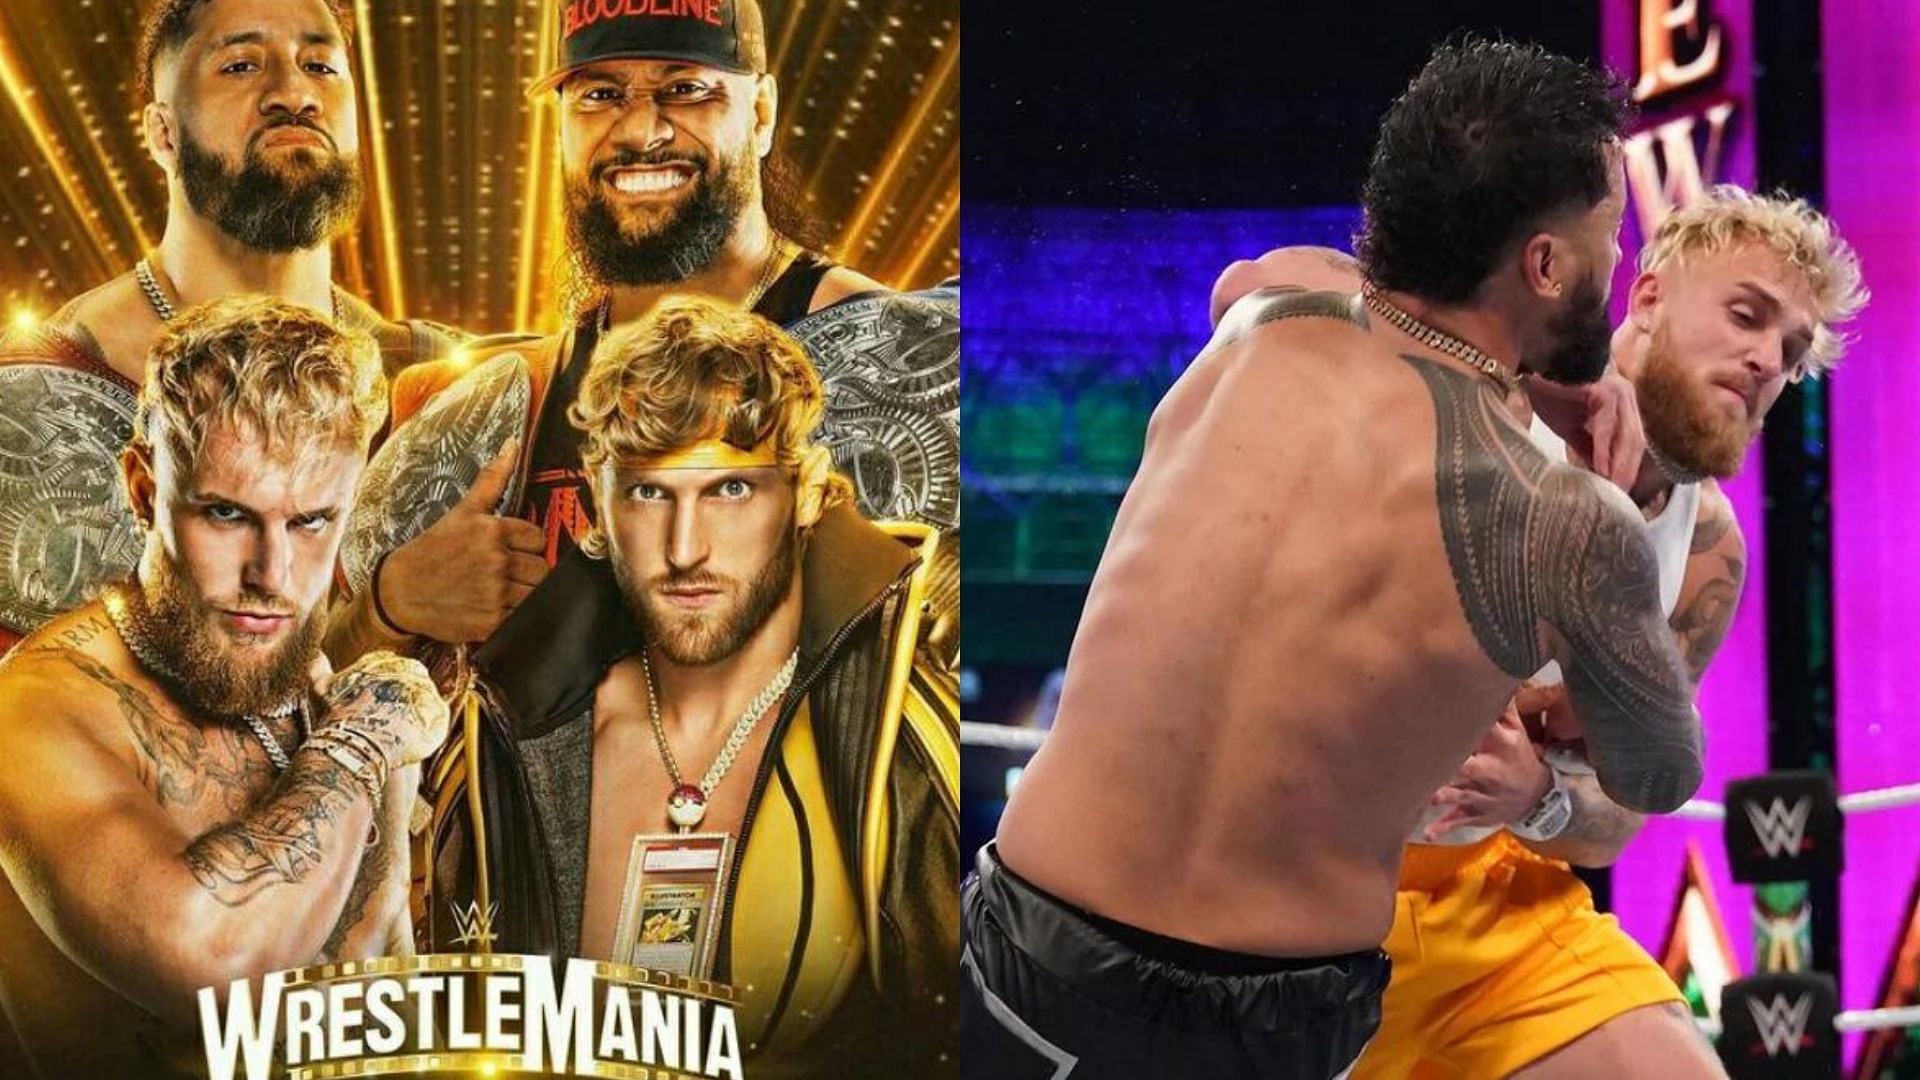 Could we see Jake and Logan Paul cross paths with The Usos down the road?